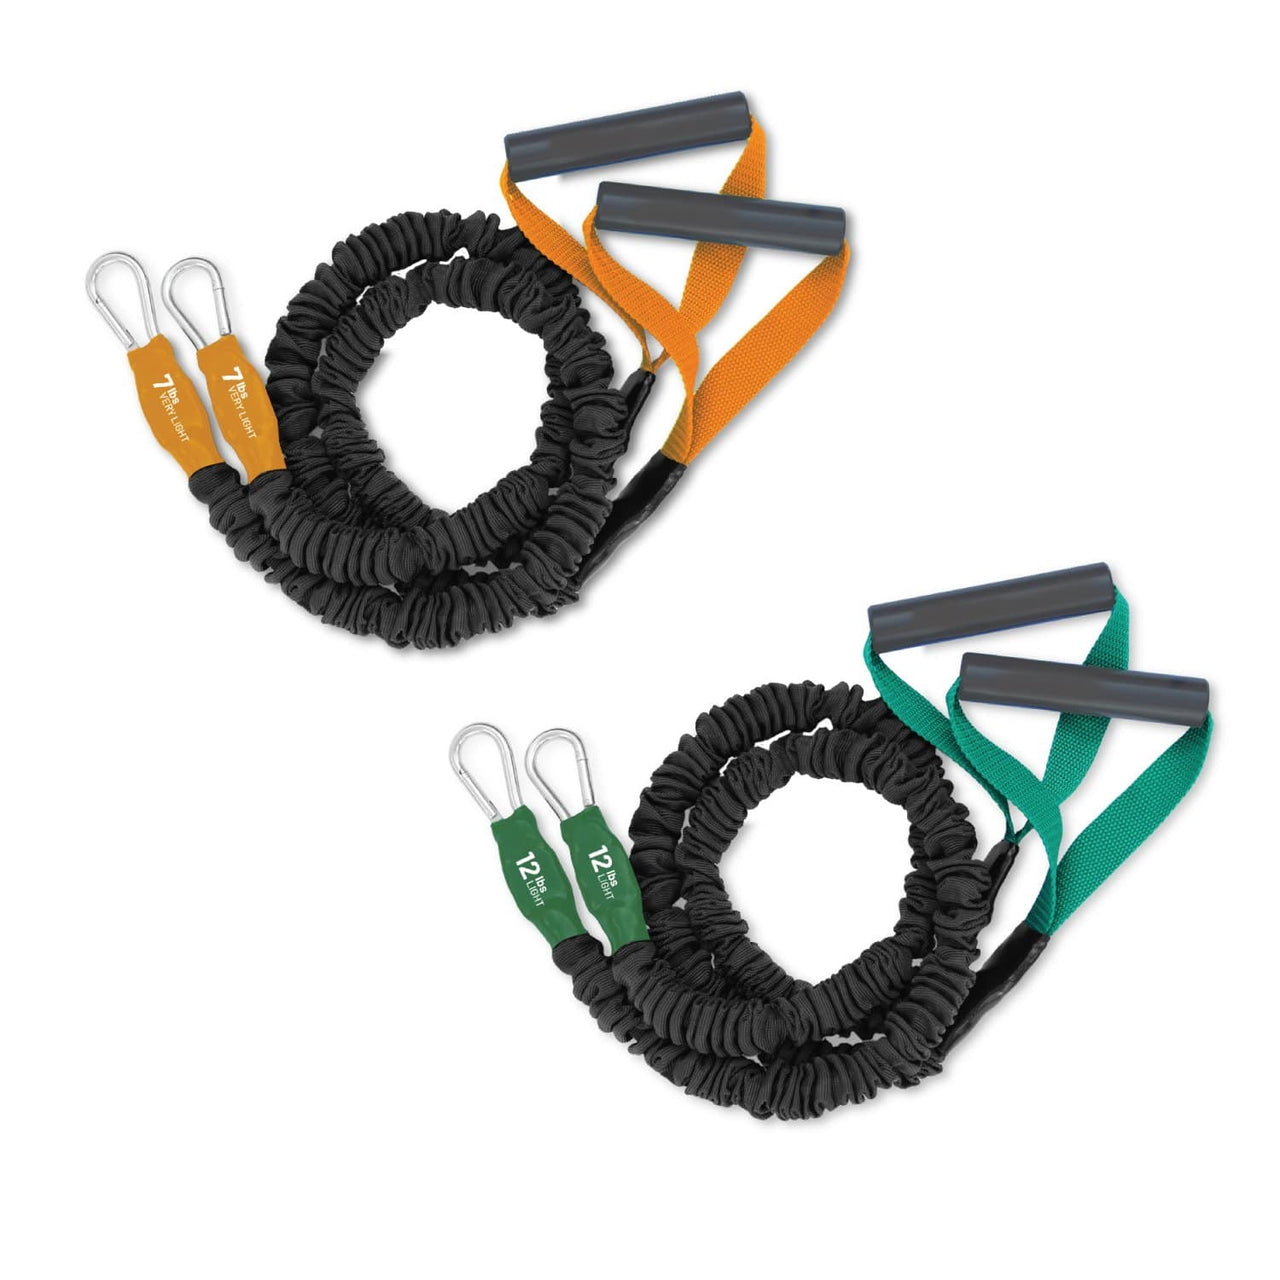 X-Over Resistance Bands™ - 2 Pack